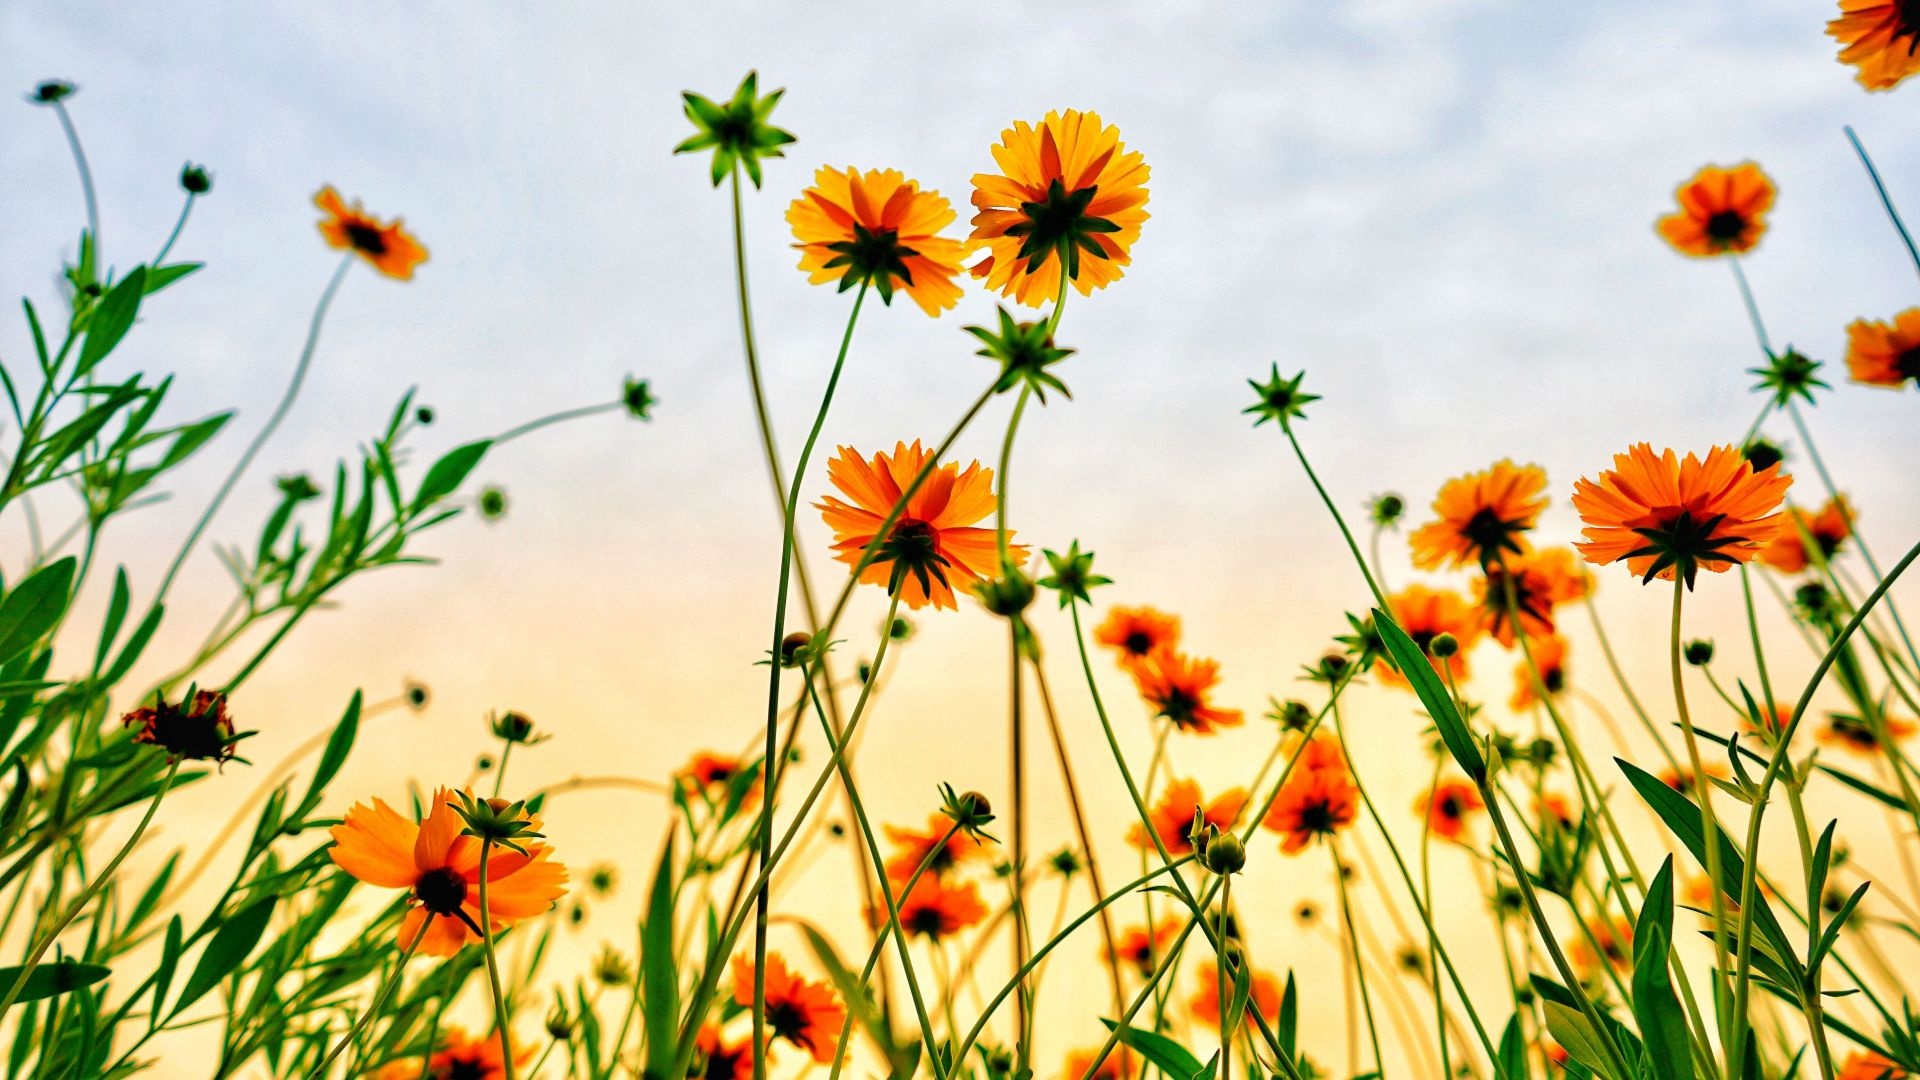 Flower Field: Cosmos, Blooming from the summer through fall, Herbs, Vegetation. 1920x1080 Full HD Wallpaper.